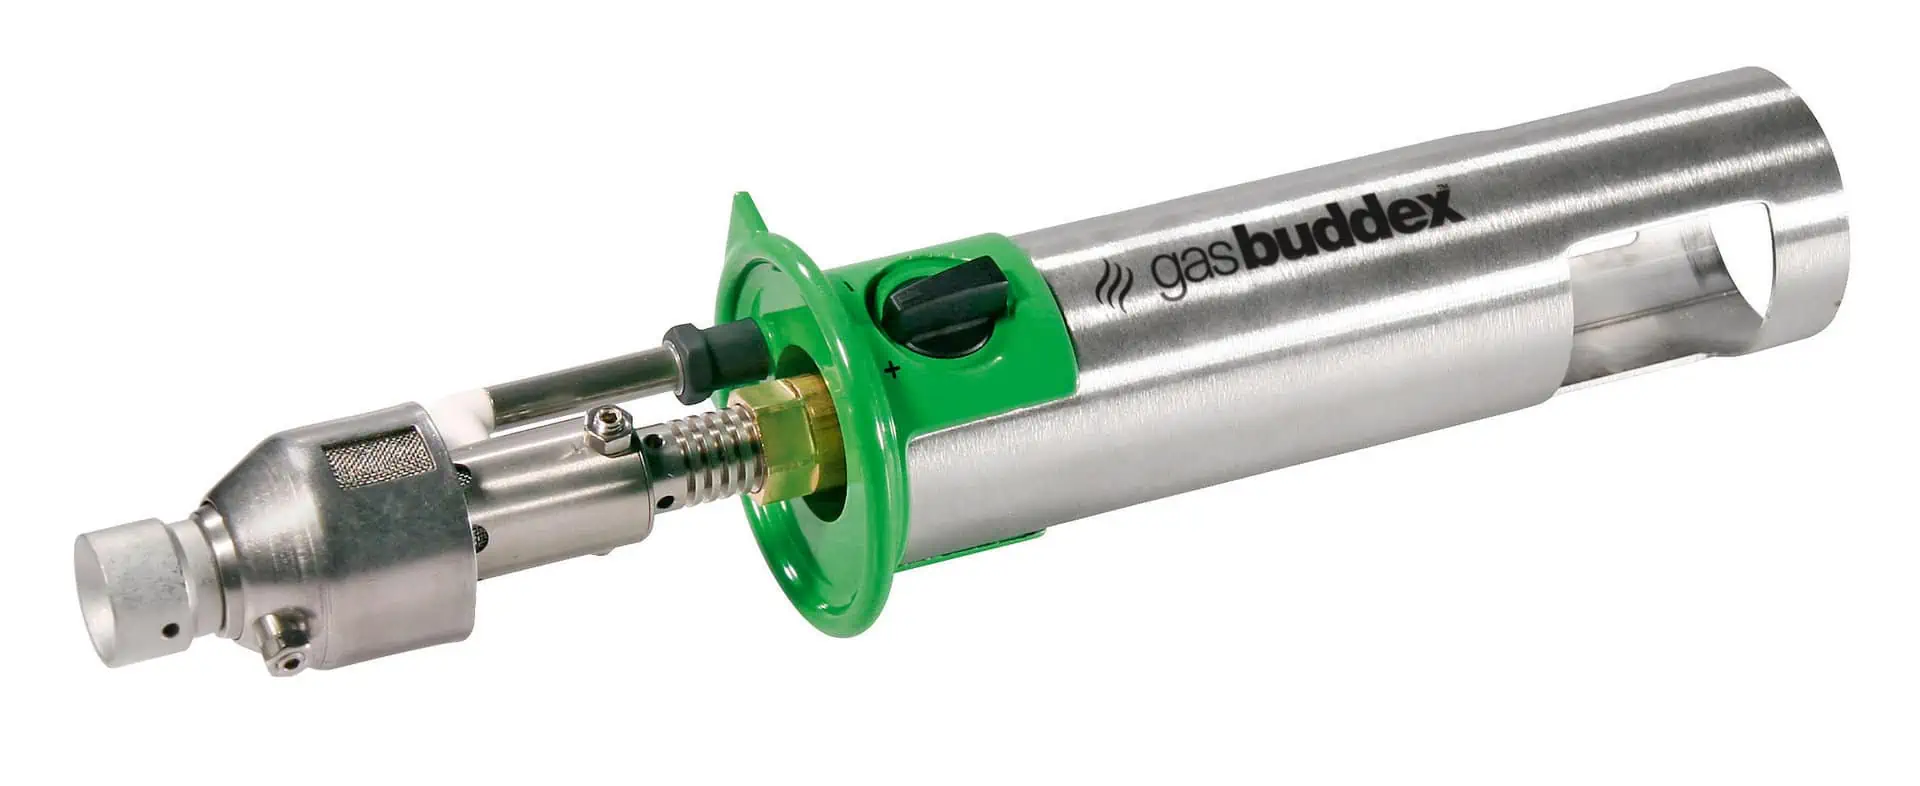 GasBuddex 20mm head and nozzle (no gas included)